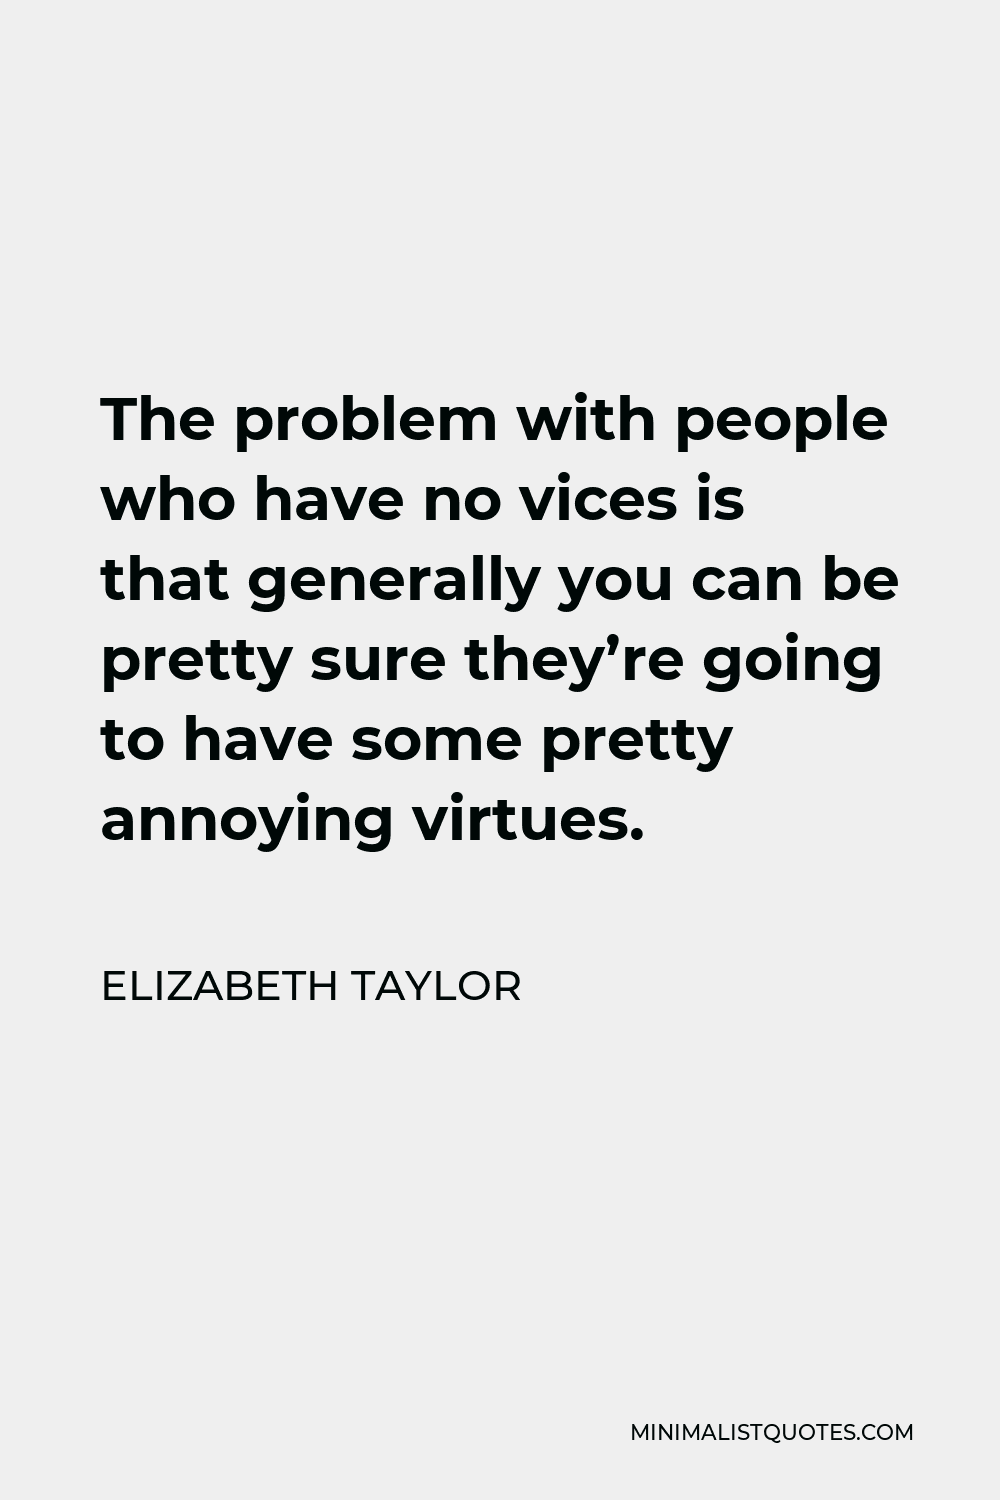 Elizabeth Taylor Quote - The problem with people who have no vices is that generally you can be pretty sure they’re going to have some pretty annoying virtues.